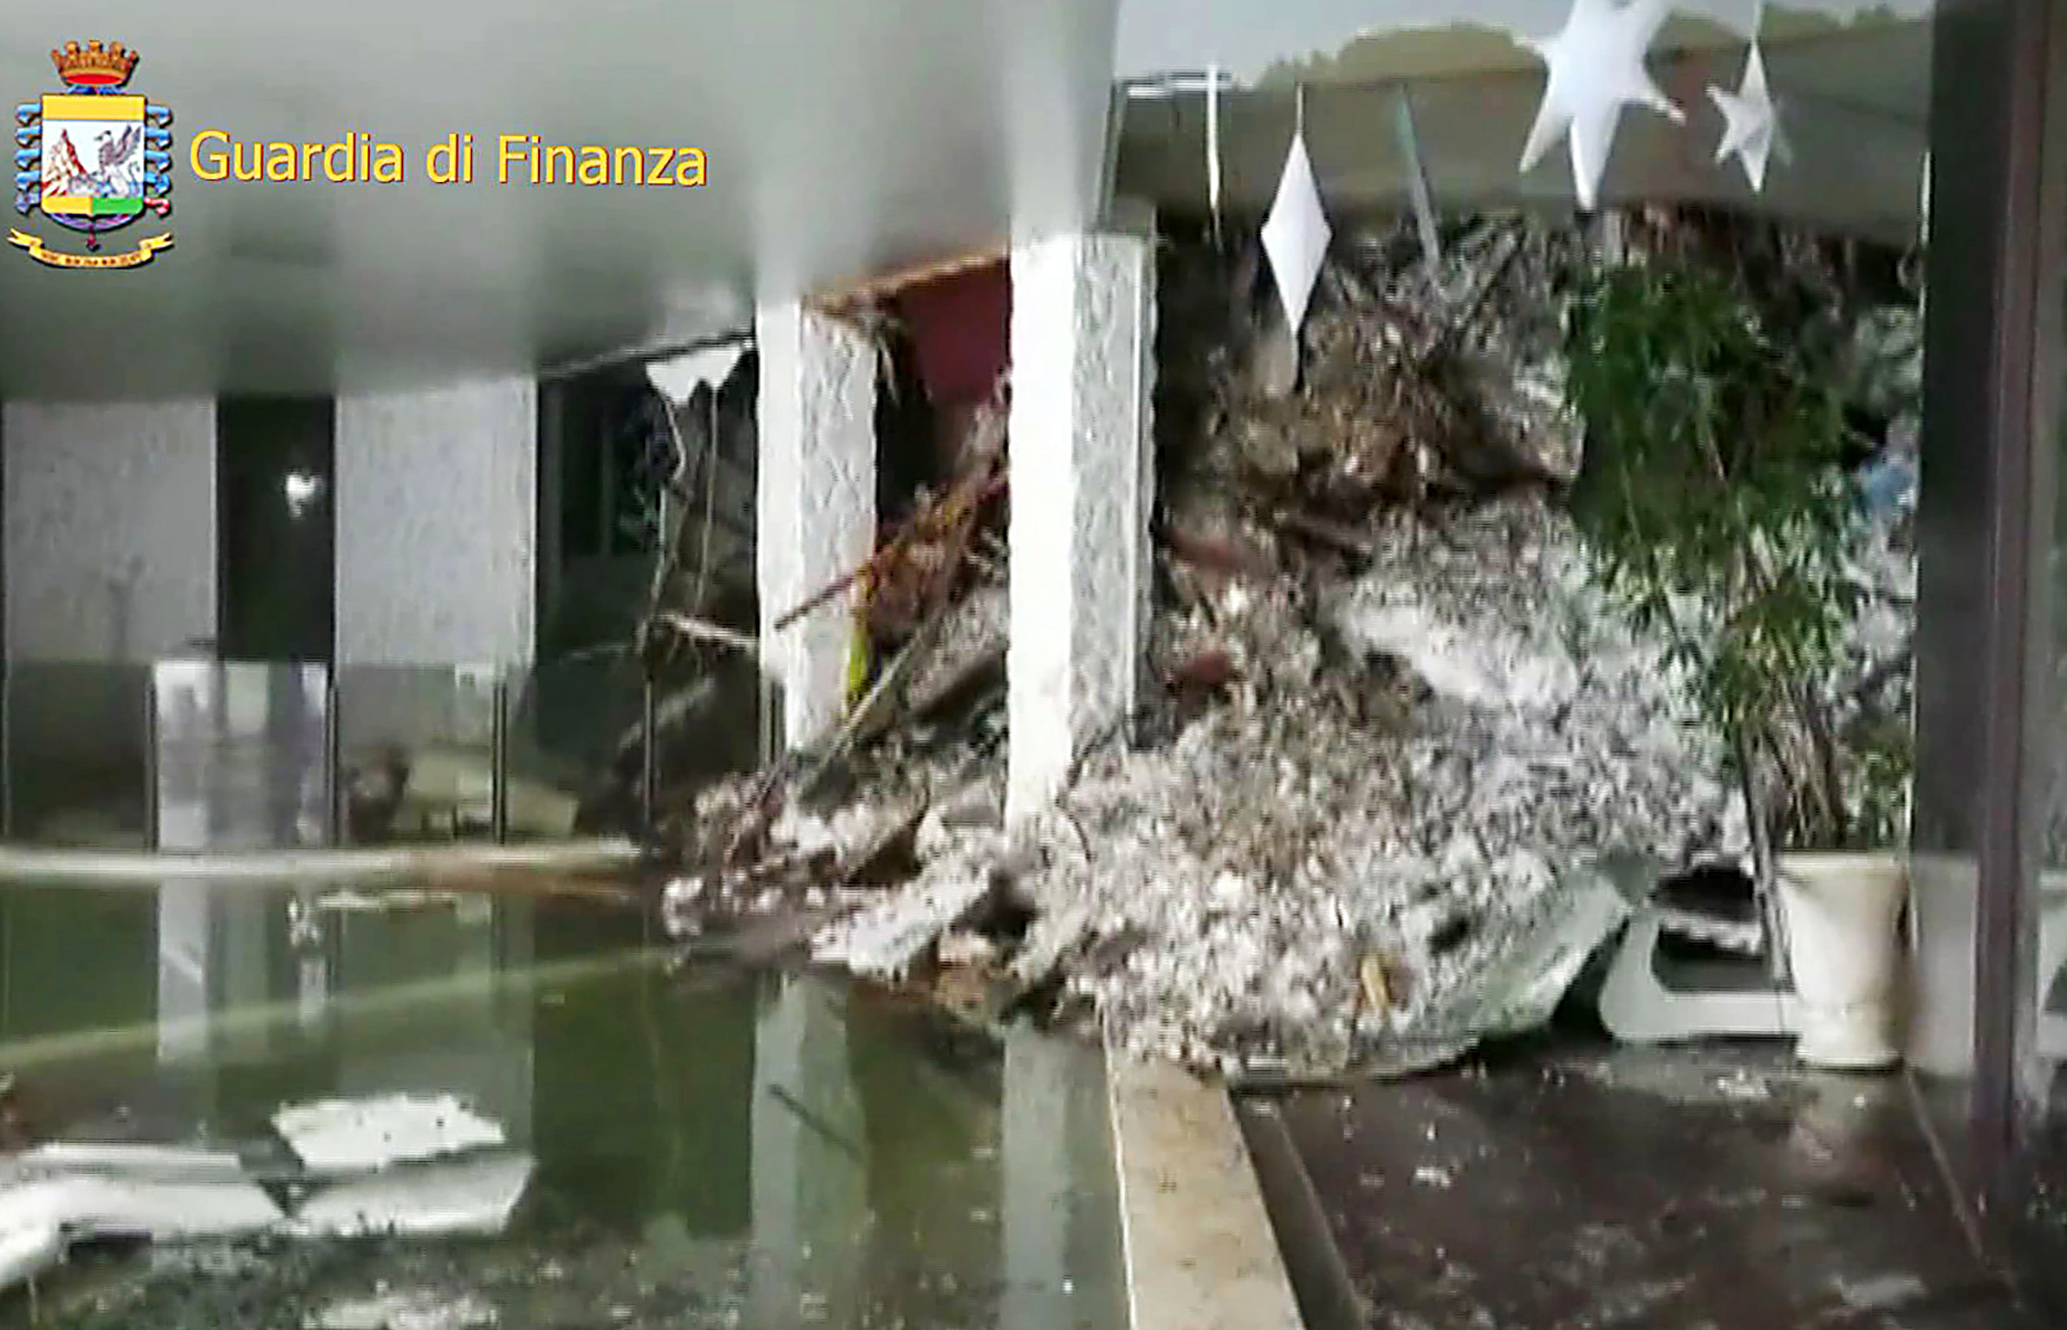 This image grab made from a video handout released by the Guardia di Finanza on January 19, 2017 shows a wall of snow engulfing the inside of the Hotel Rigopiano, near the village of Farindola, on the eastern lower slopes of the Gran Sasso mountain. Up to 30 people were feared to have died after an Italian mountain Hotel Rigopiano was engulfed by a powerful avalanche in the earthquake-ravaged centre of the country. Italy's Civil Protection agency confirmed the Hotel Rigopiano had been engulfed by a two-metre (six-feet) high wall of snow and that emergency services were struggling to get ambulances and diggers to the site. / AFP PHOTO / Guardia di Finanza press office / Handout / RESTRICTED TO EDITORIAL USE - MANDATORY CREDIT "AFP PHOTO / GUARDIA DI FINANZA " - NO MARKETING NO ADVERTISING CAMPAIGNS - DISTRIBUTED AS A SERVICE TO CLIENTS